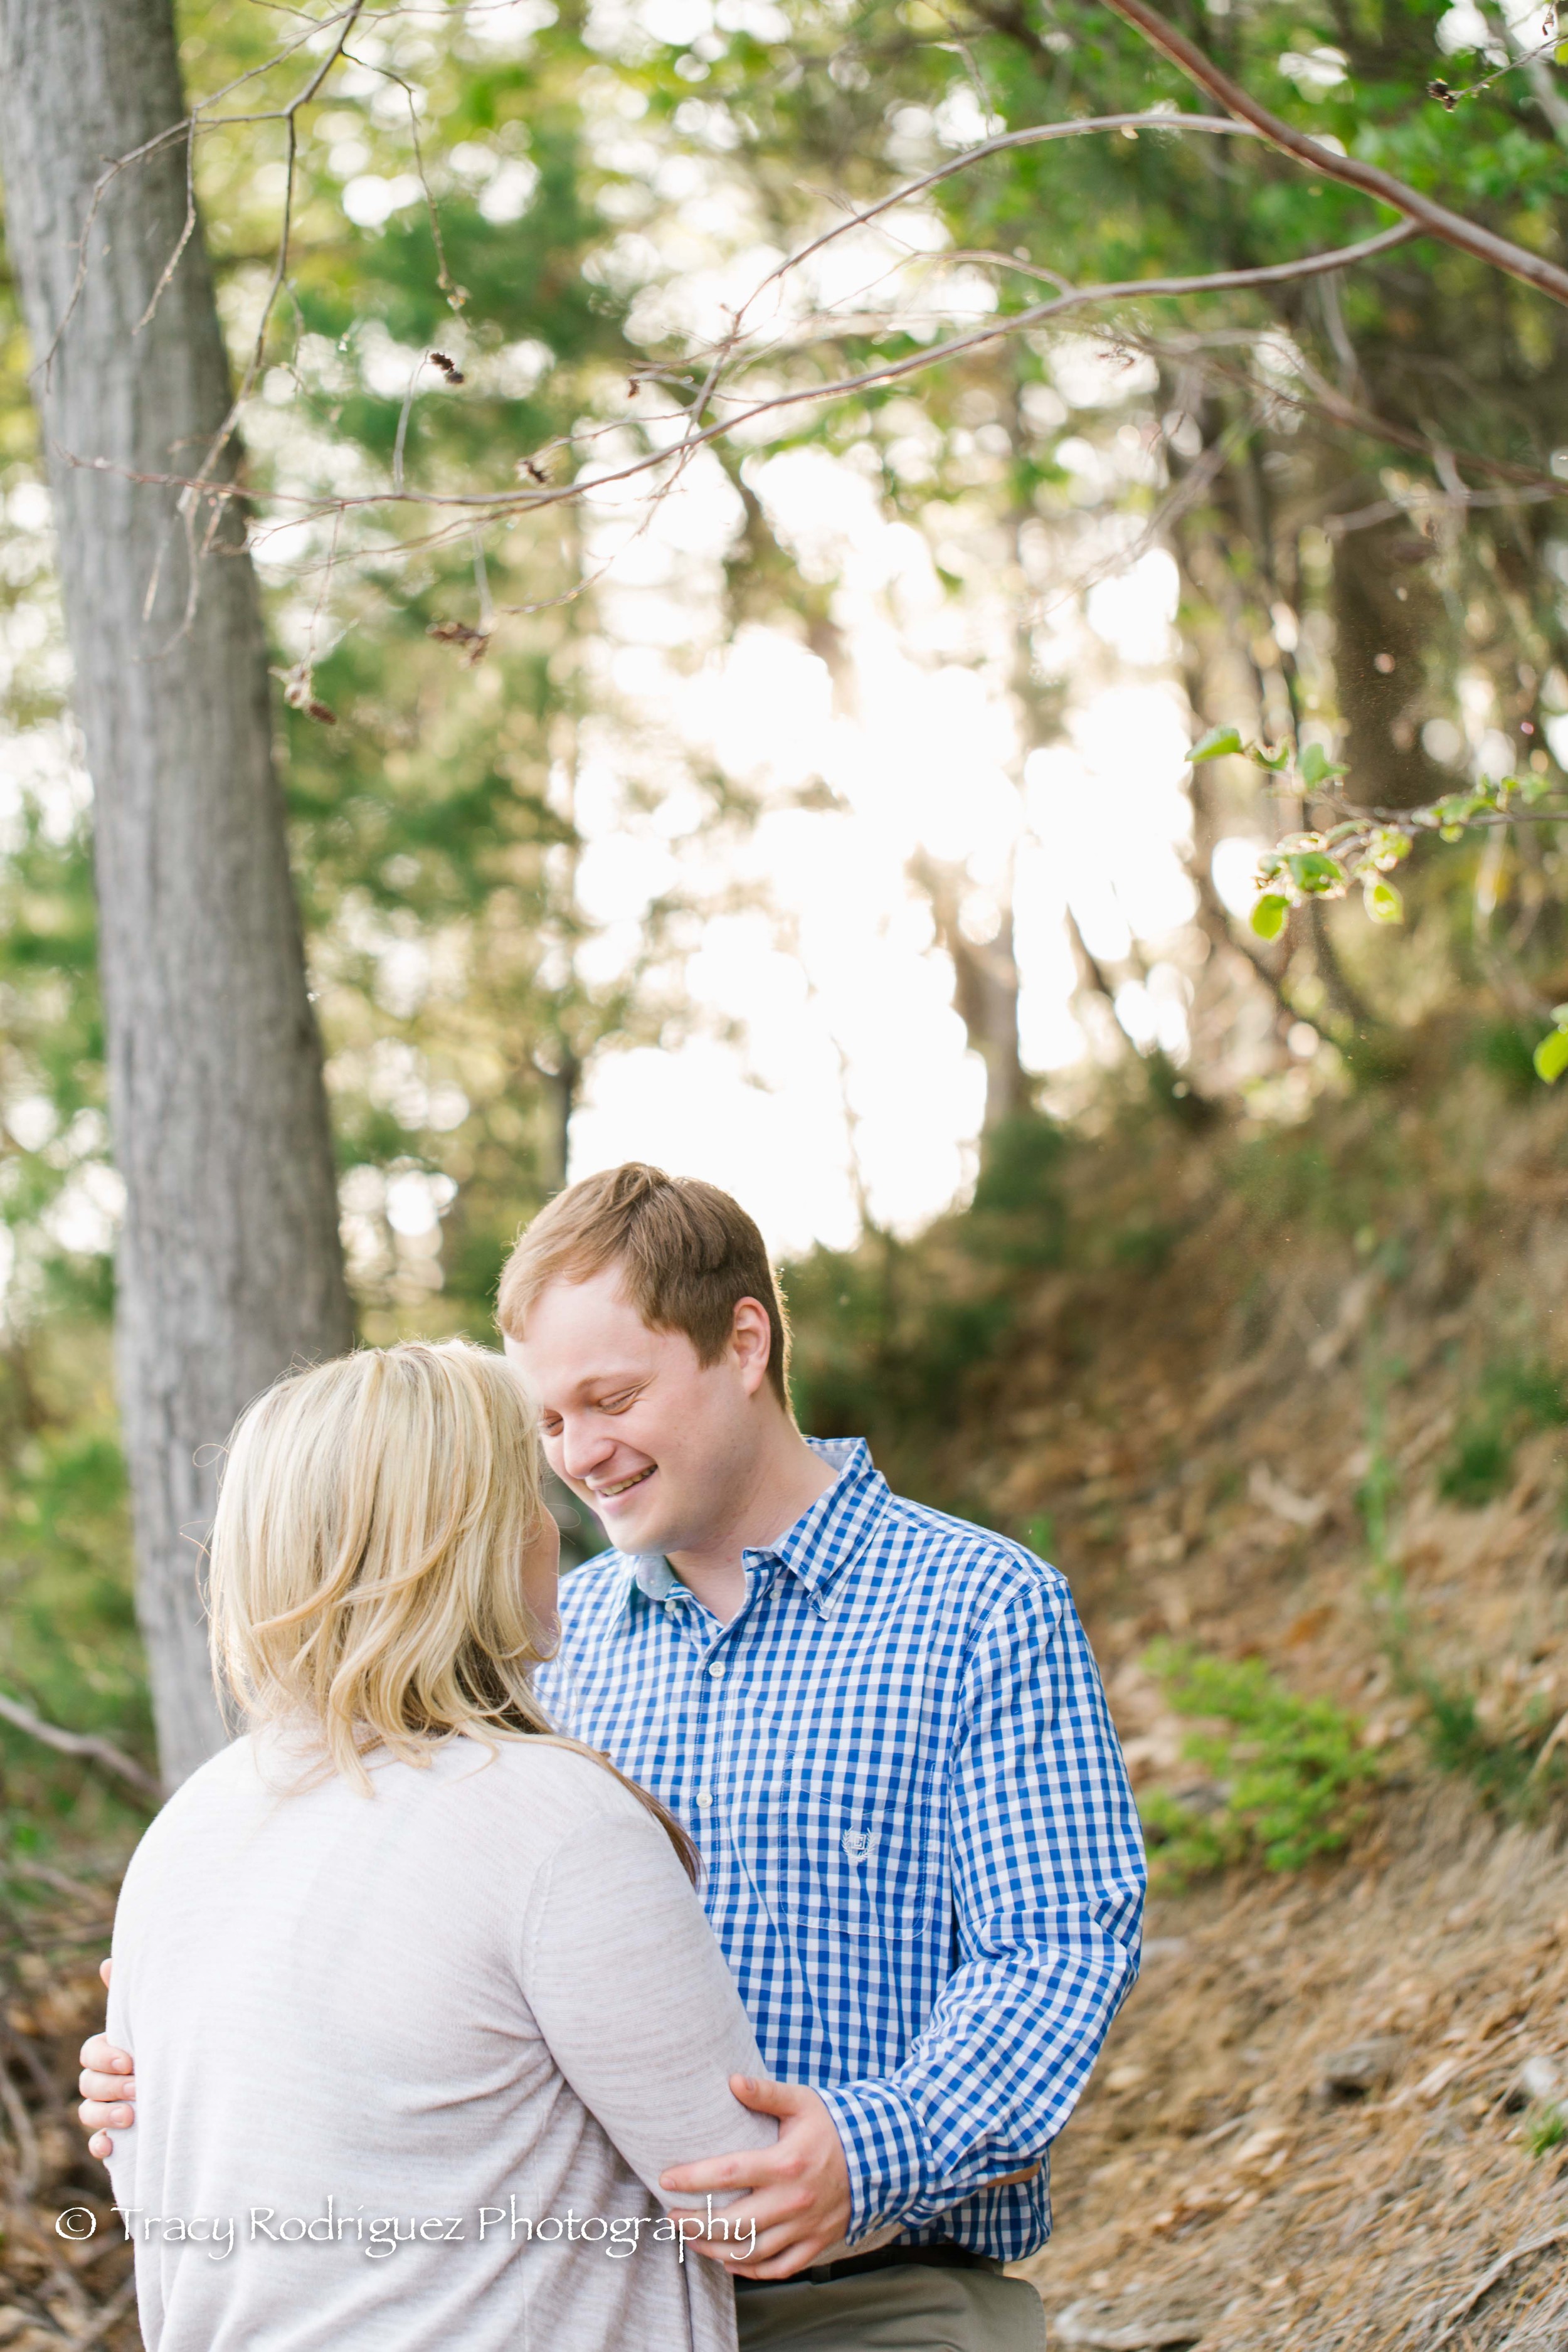 TracyRodriguezPhotography-Engagement-LowRes-31.jpg